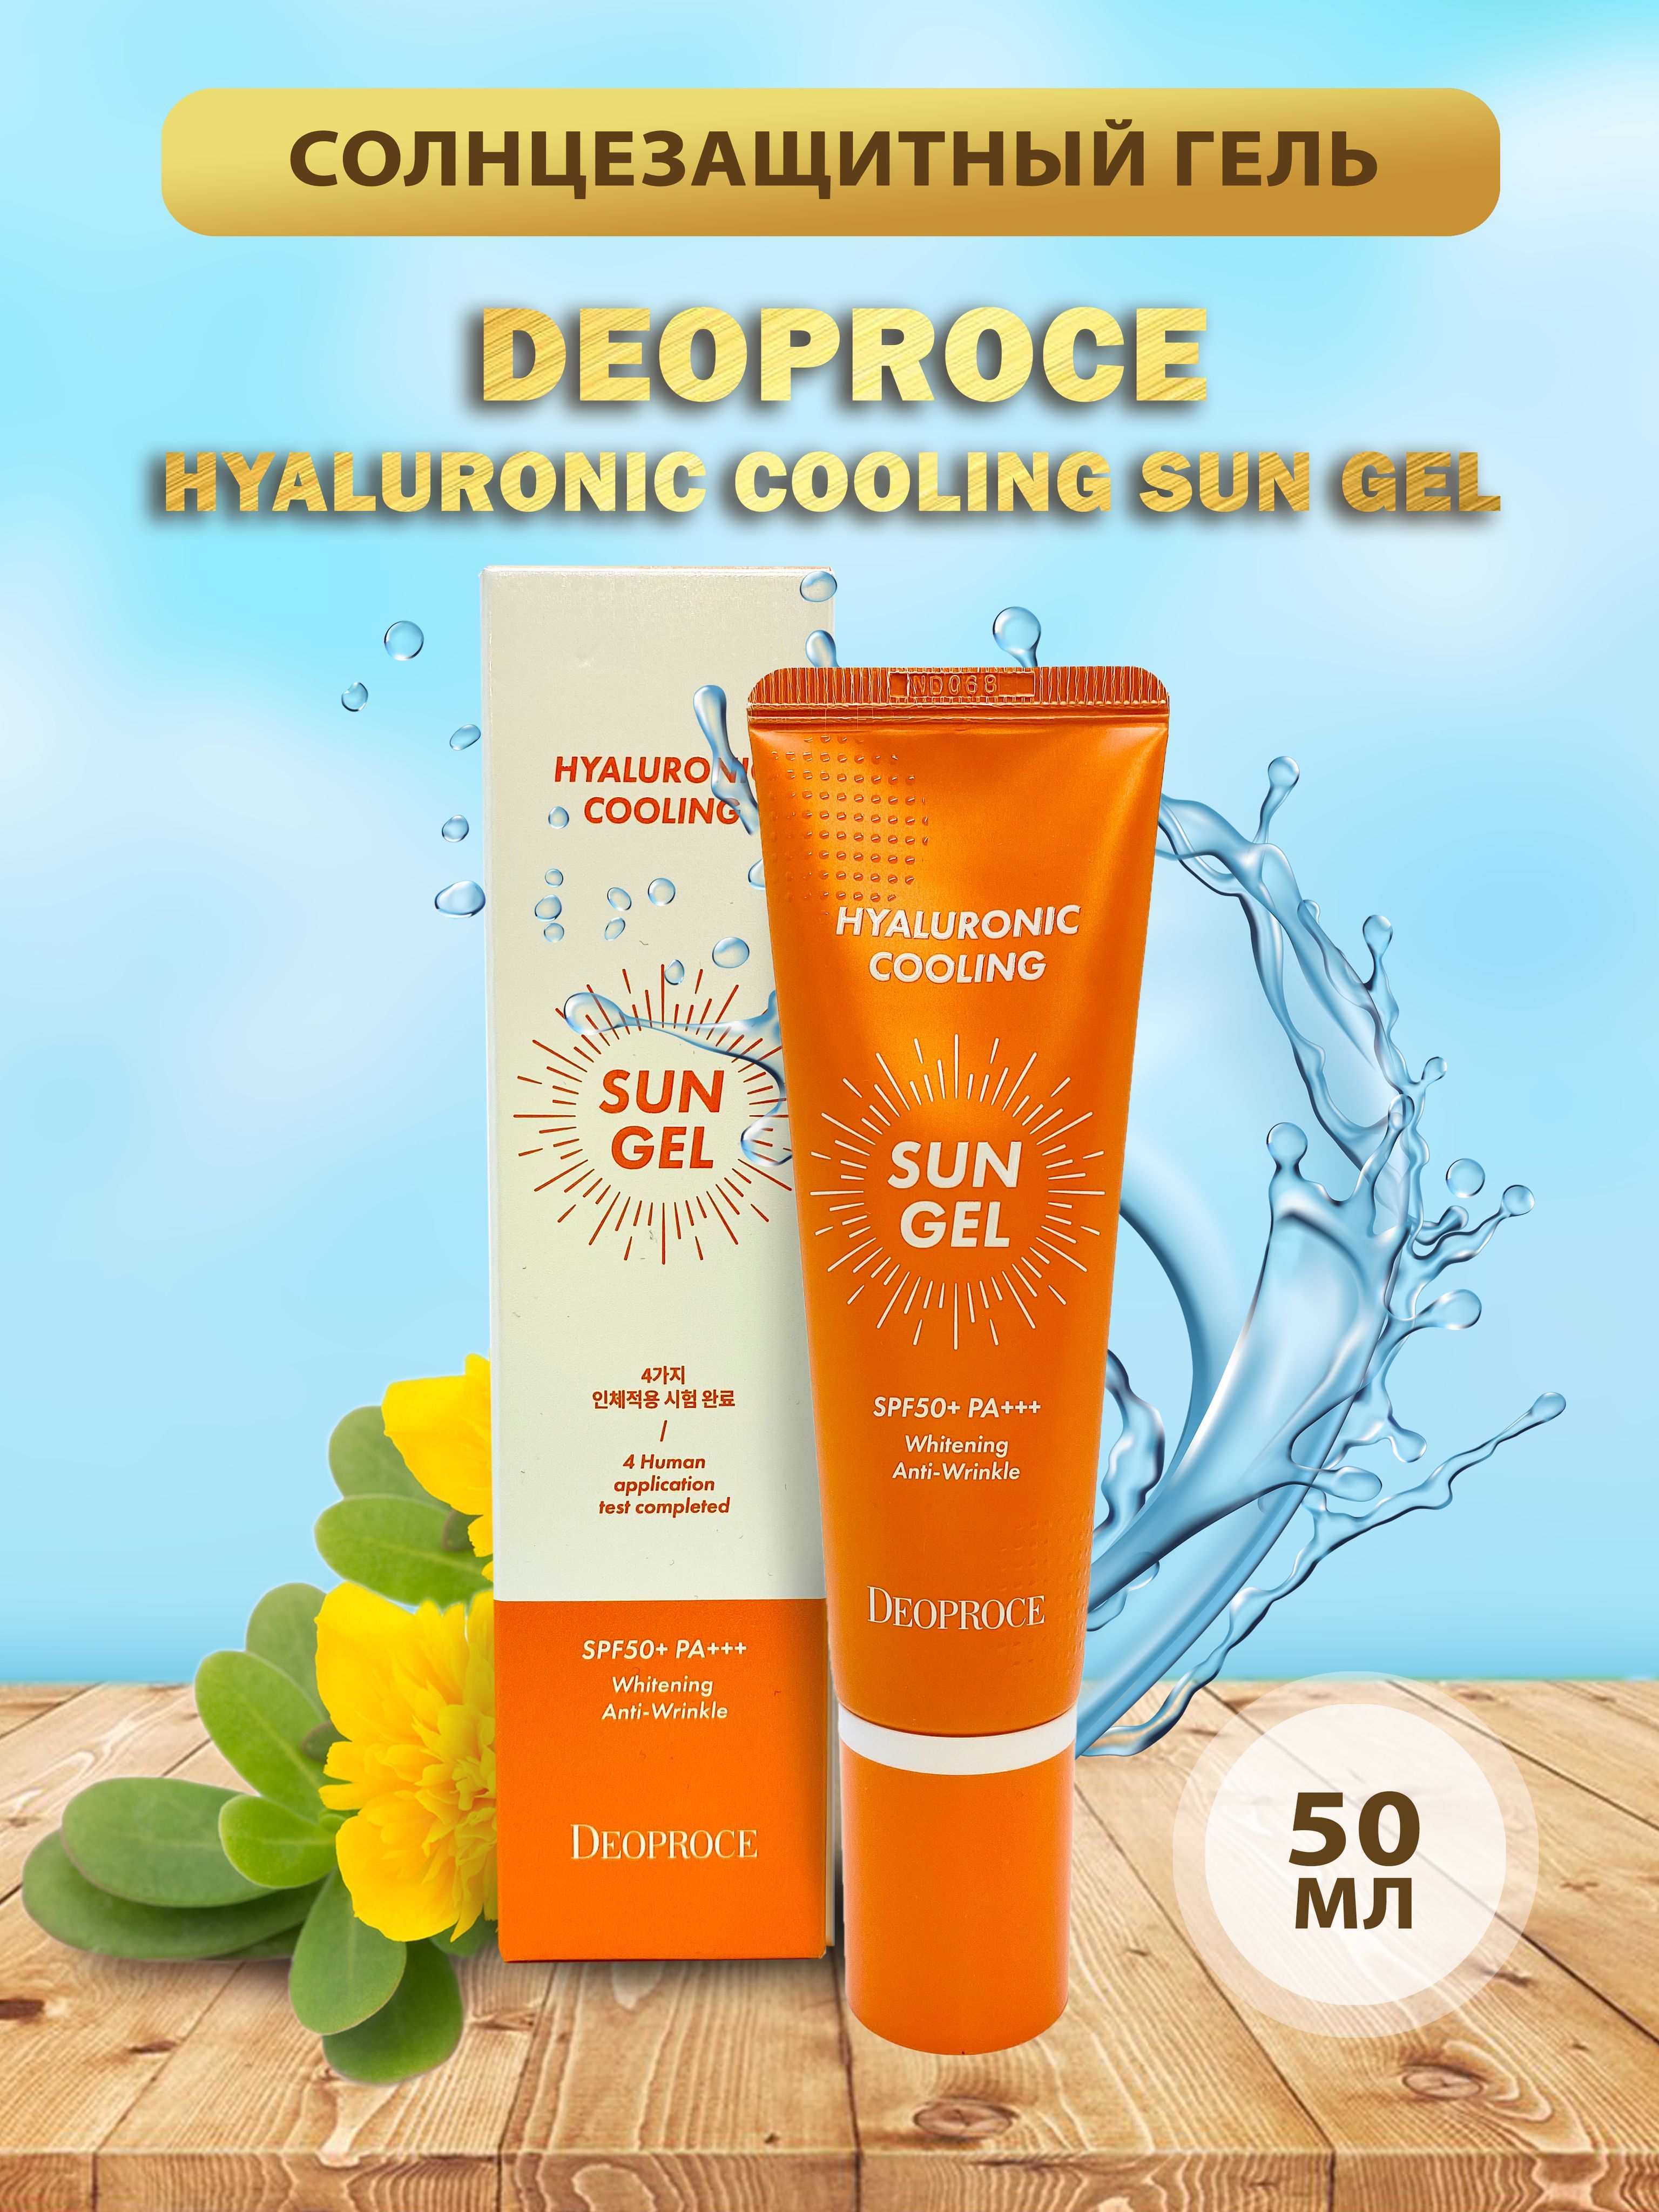 Hyaluronic cooling sun gel. Deoproce Hyaluronic Cooling Sun Gel. 2175 Deoproce Hyaluronic Cooling Sun Gel Set Special Edition SPF 50+ pa+++. Hyaluronic Cooling Sun Gel spf50+ pa+++ Whitening Anti-Wrinkle. Солнцезащитный гель-крем Centella Sun Gel spf50+/pa+++ 50ml (Deoproce).